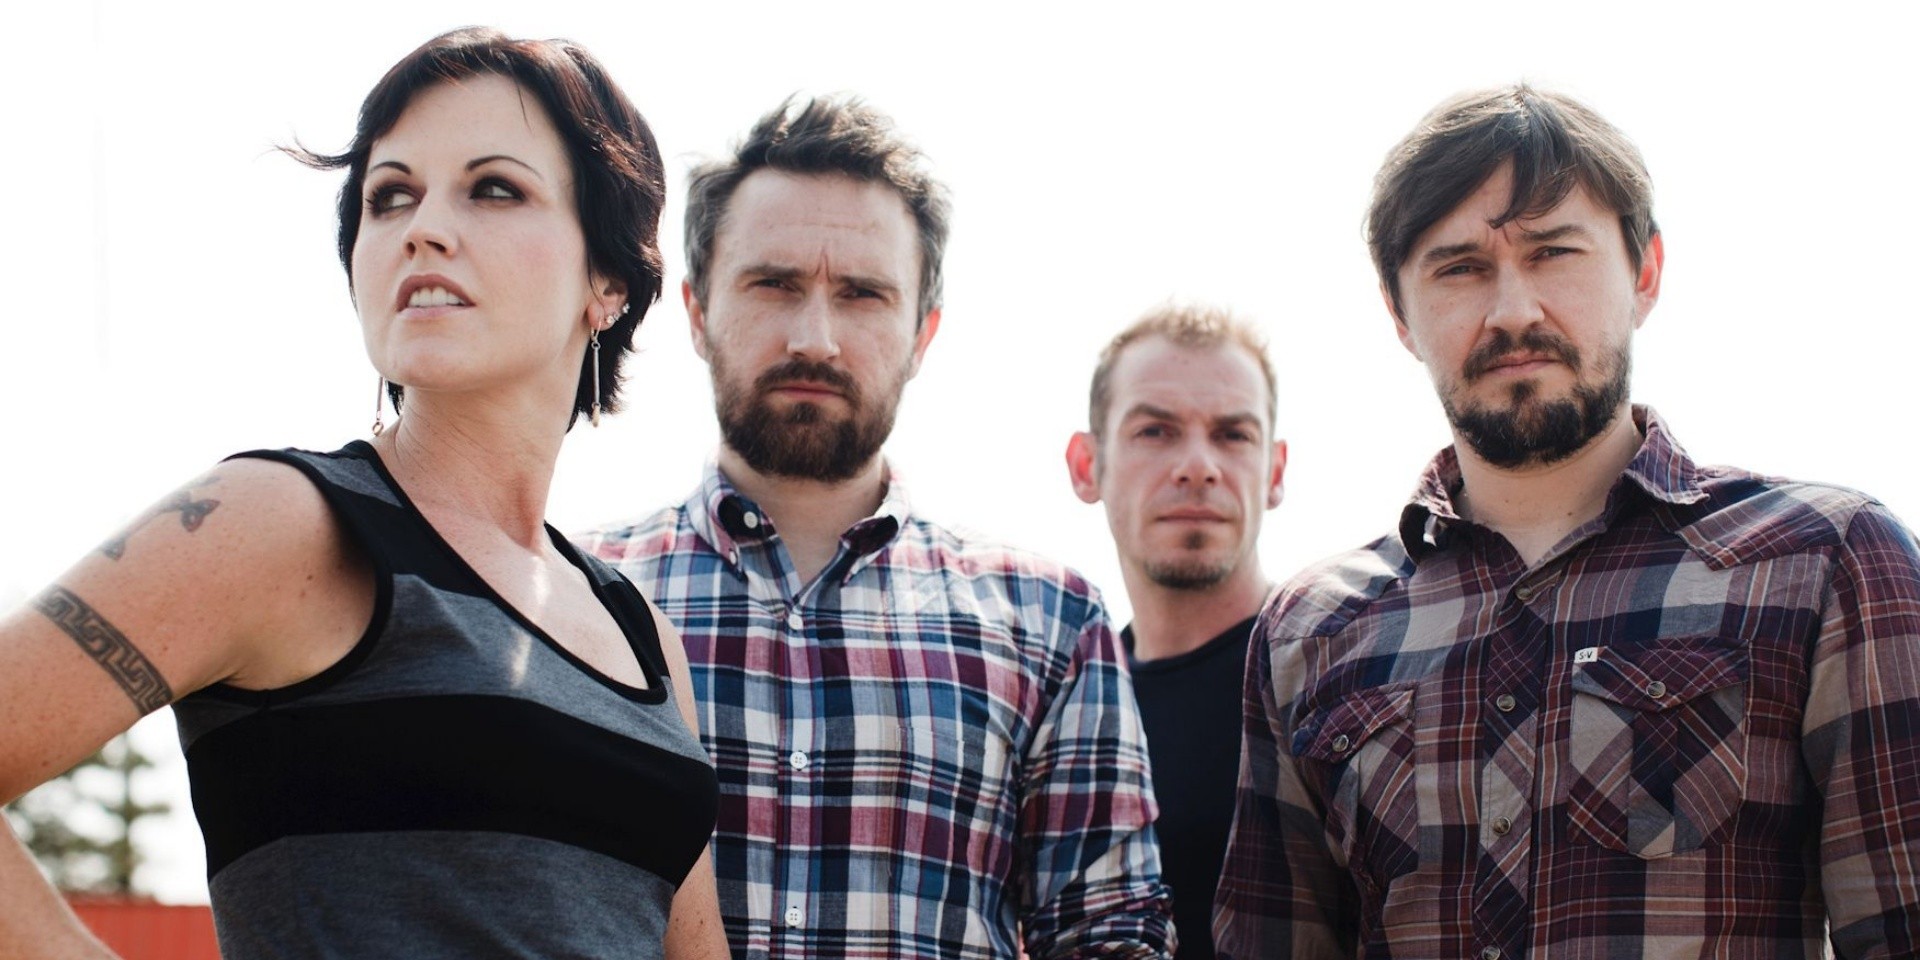 The Cranberries announce final album with Dolores O'Riordan, shares new single 'All Over Now' – listen